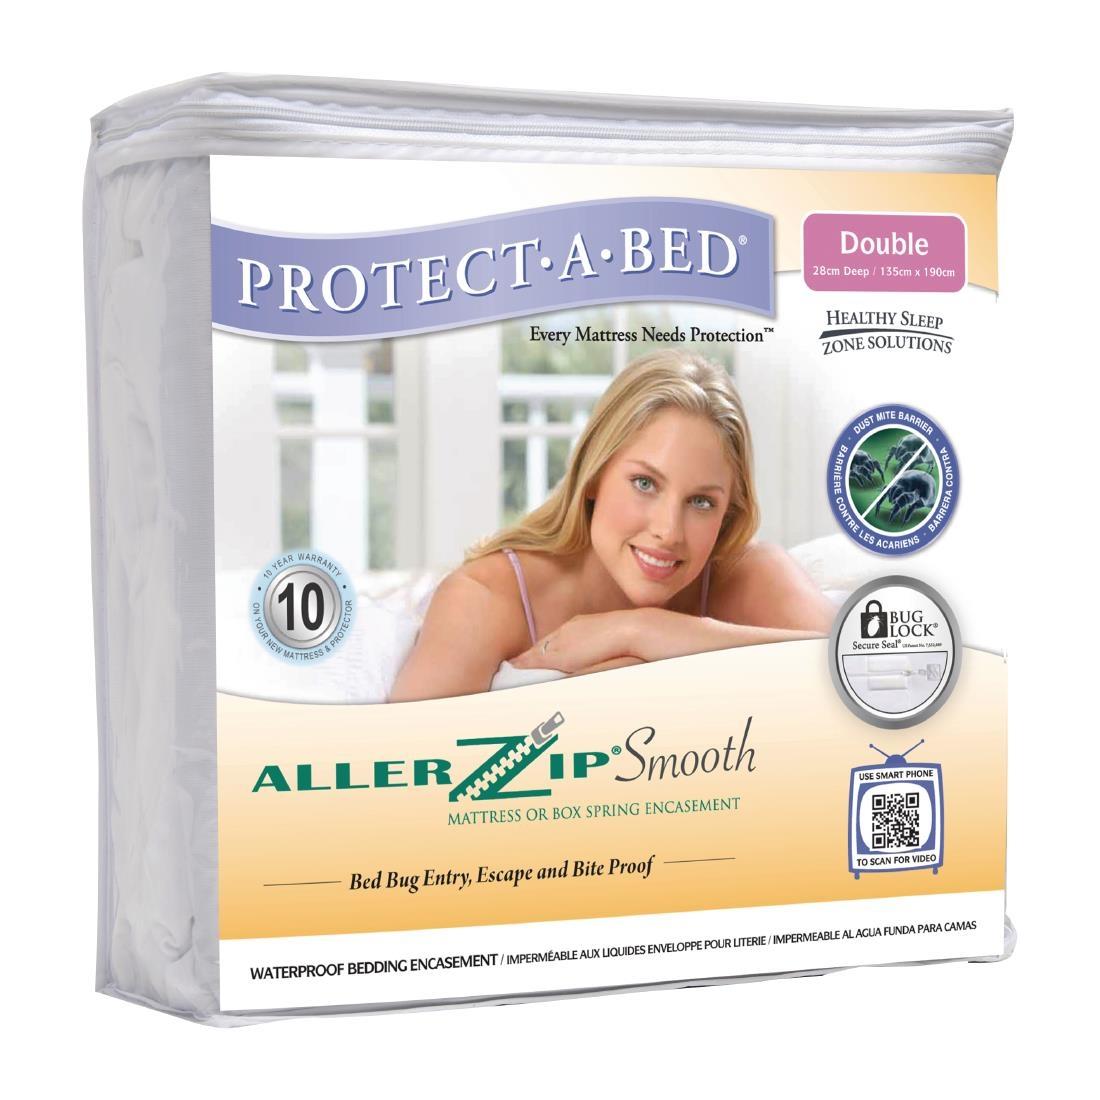 Protect-A-Bed Allerzip Smooth Mattress Protector Special 200cm - HA514  - 4